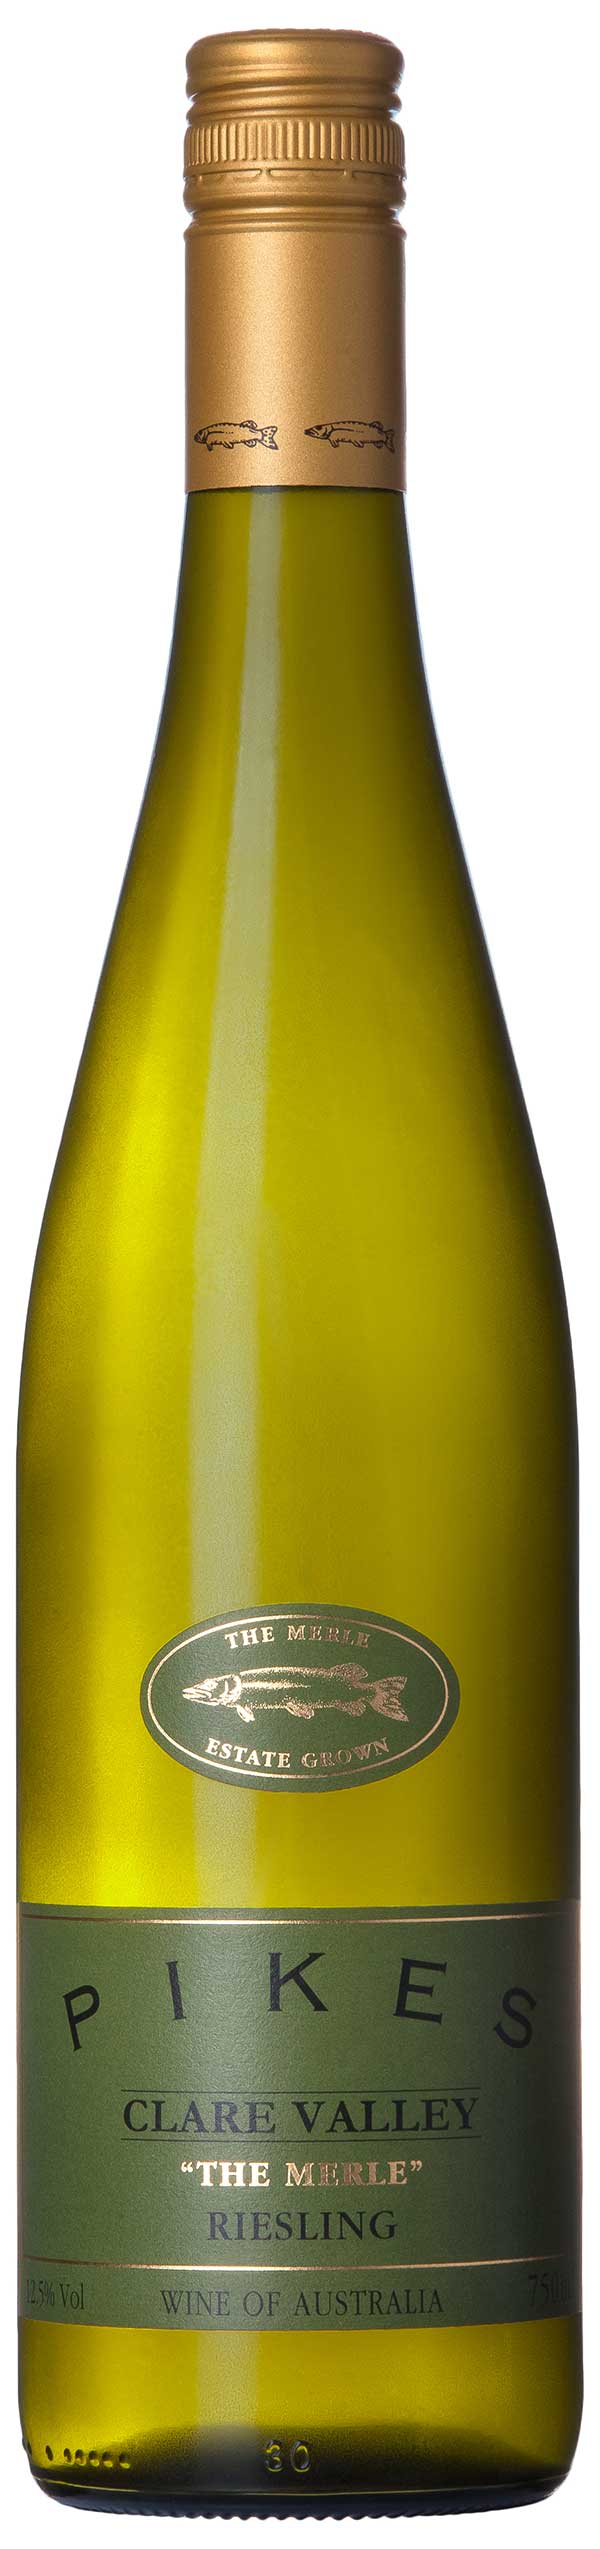 2018 Pikes The Merle Reserve Riesling Clare Valley - click image for full description